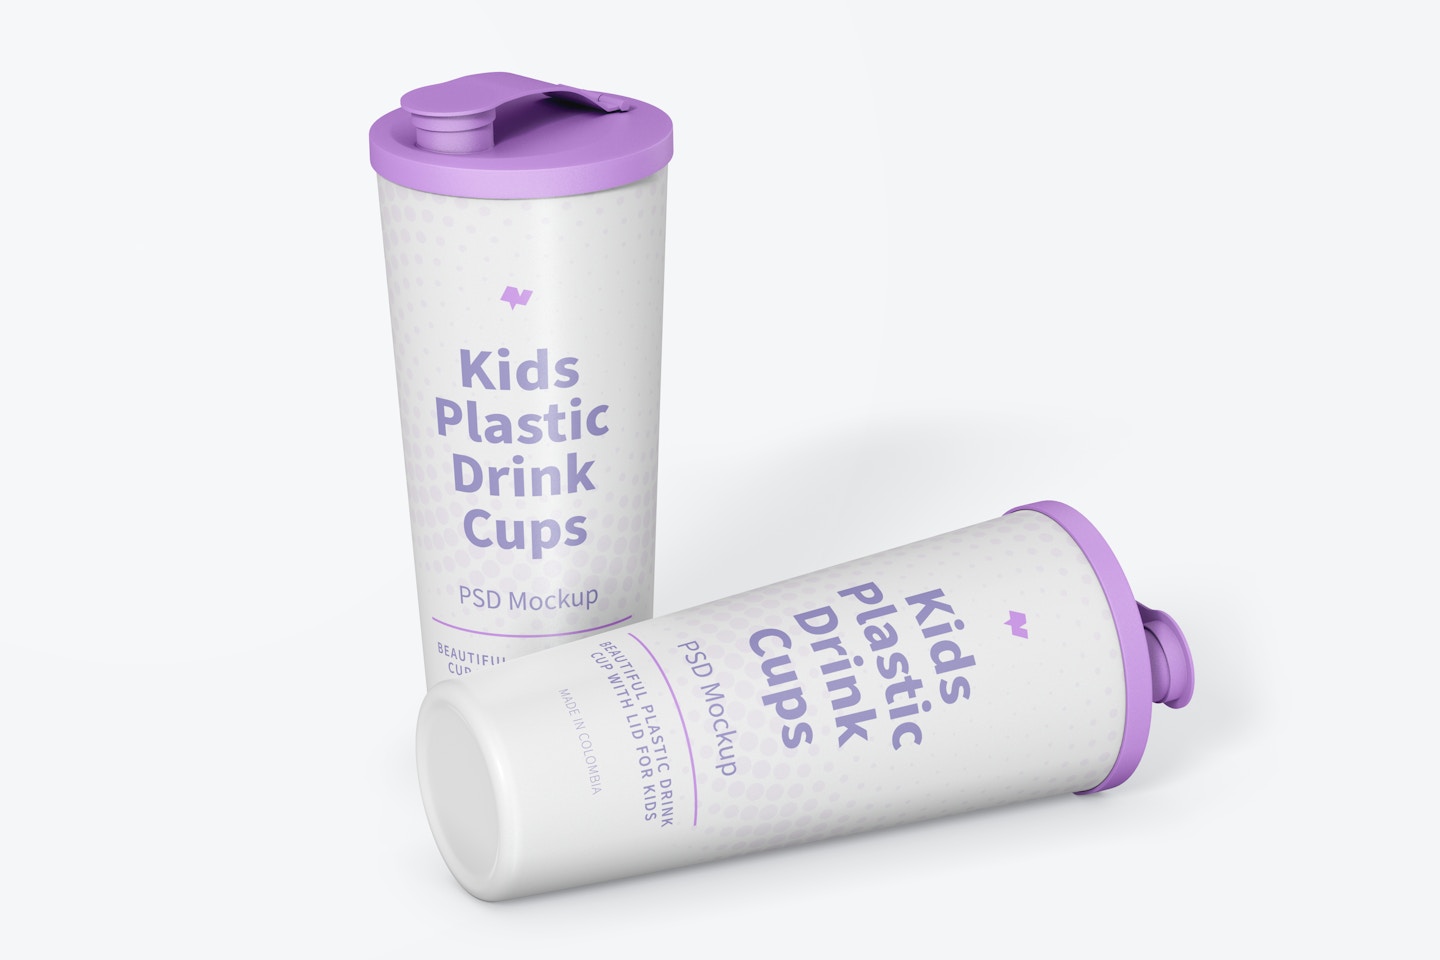 Kids Plastic Drink Cup With Lid Mockup, Standing and Dropped